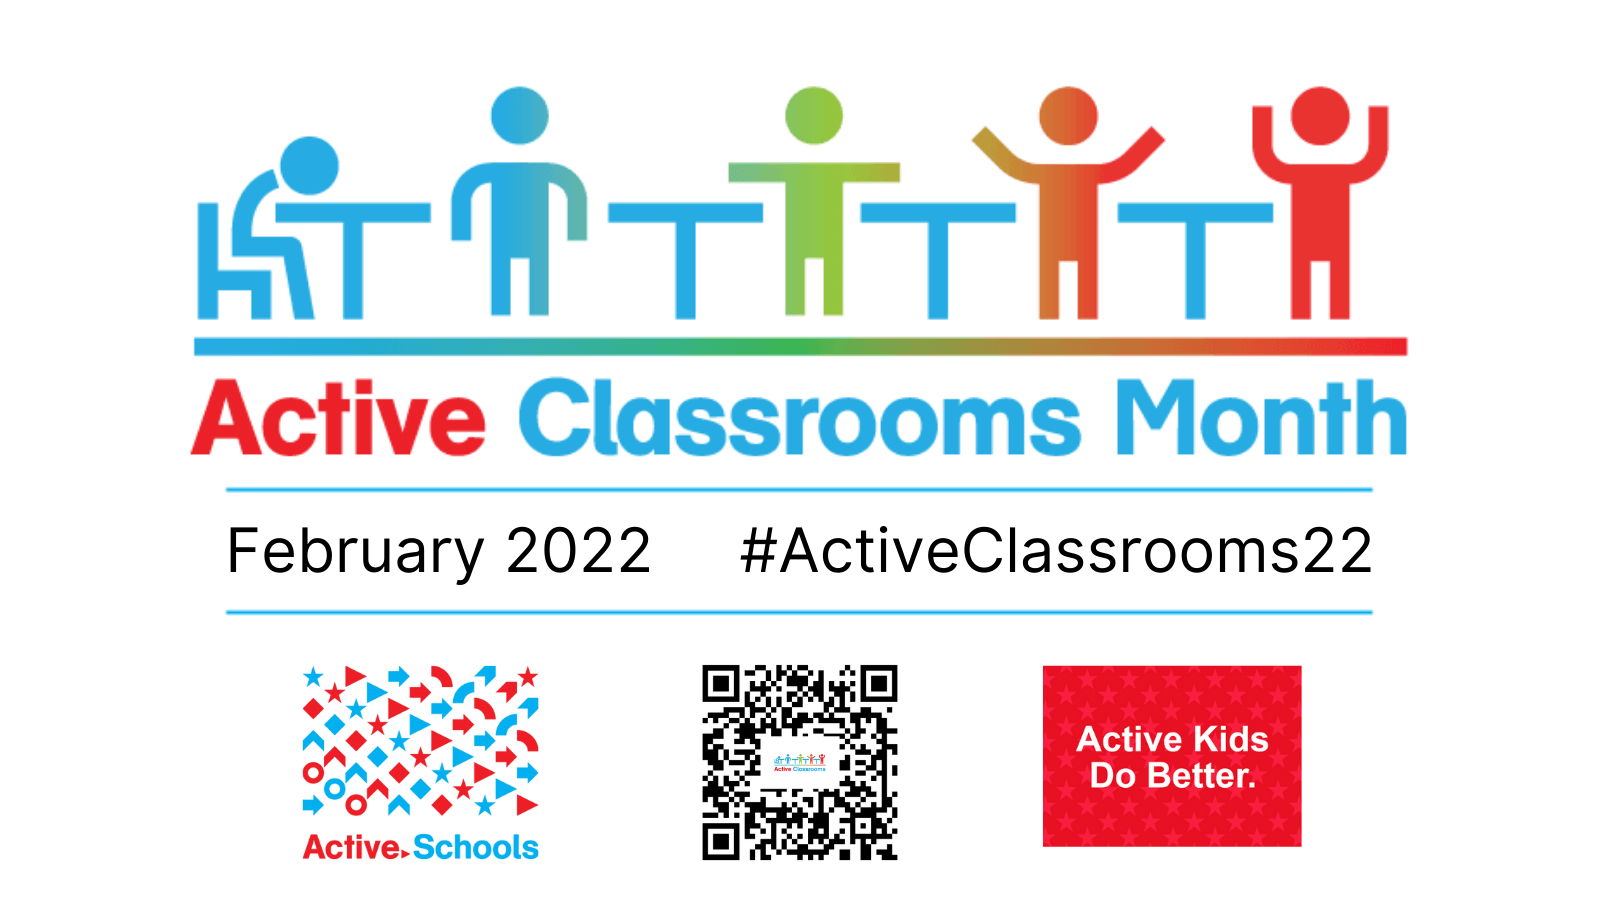 February 2022 #ActiveClassrooms22 (2)